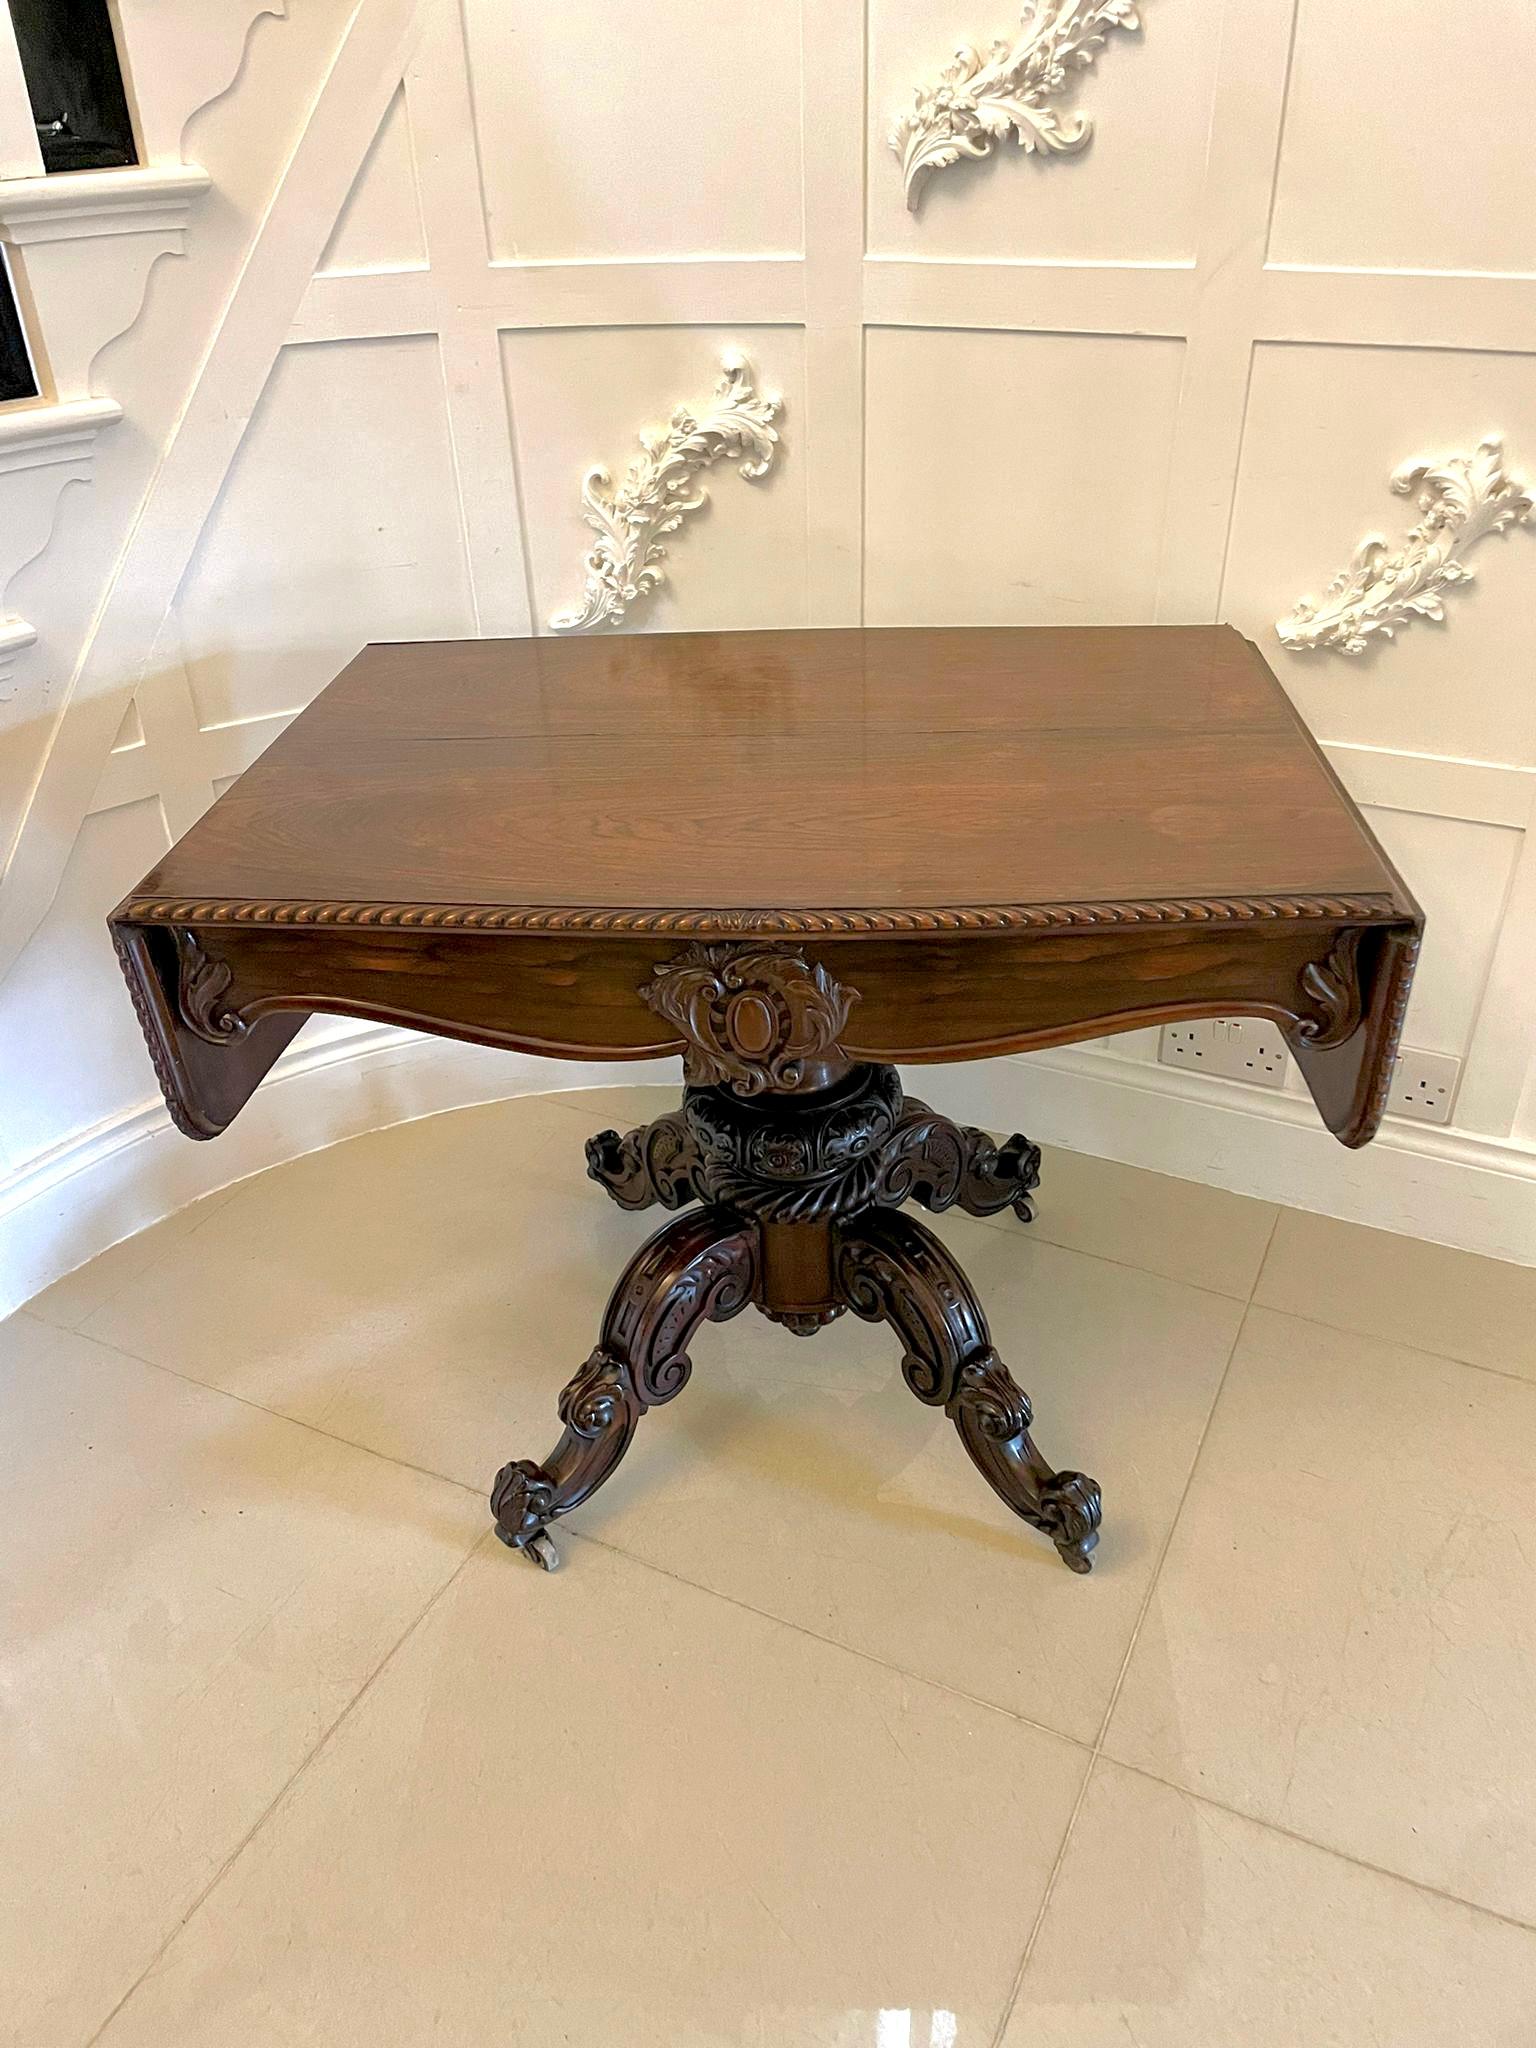 Outstanding quality Victorian carved rosewood sofa table having a fabulous carved gadrooned edge detail to the top with two drop leaves. The frieze is fitted with one long carved drawer supported by a fantastic carved solid rosewood column; it